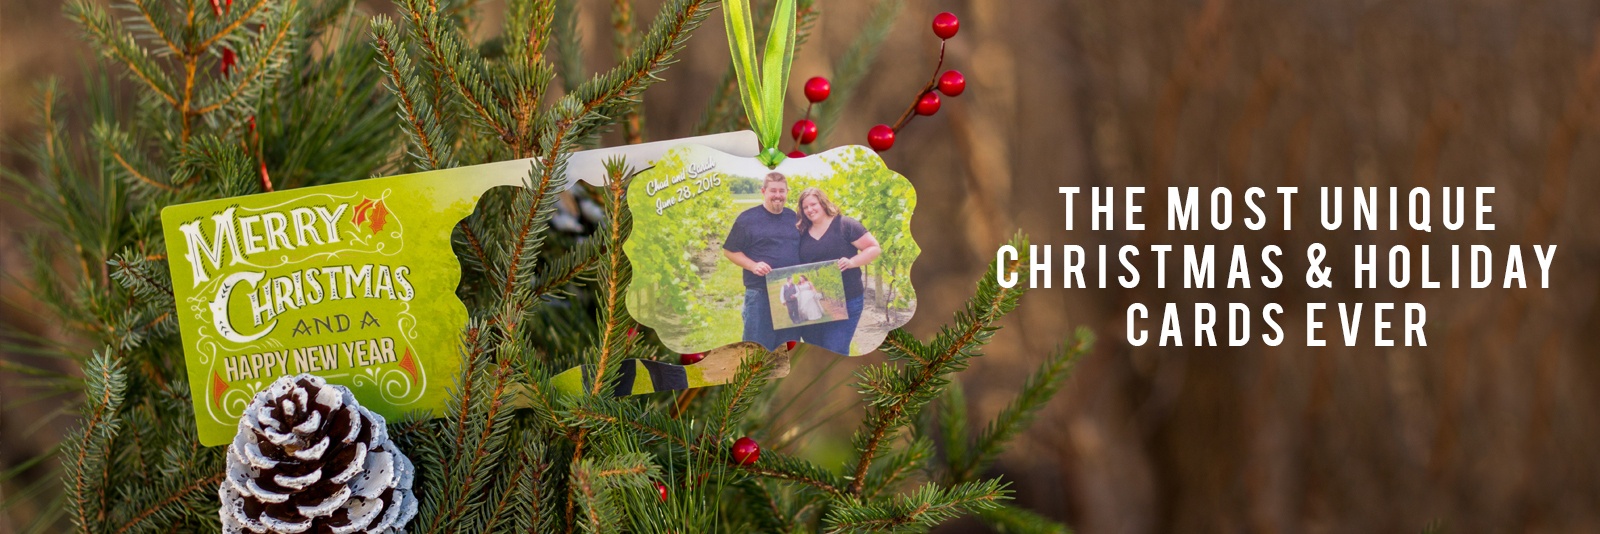 The Most Unique Christmas and Holiday Cards Ever